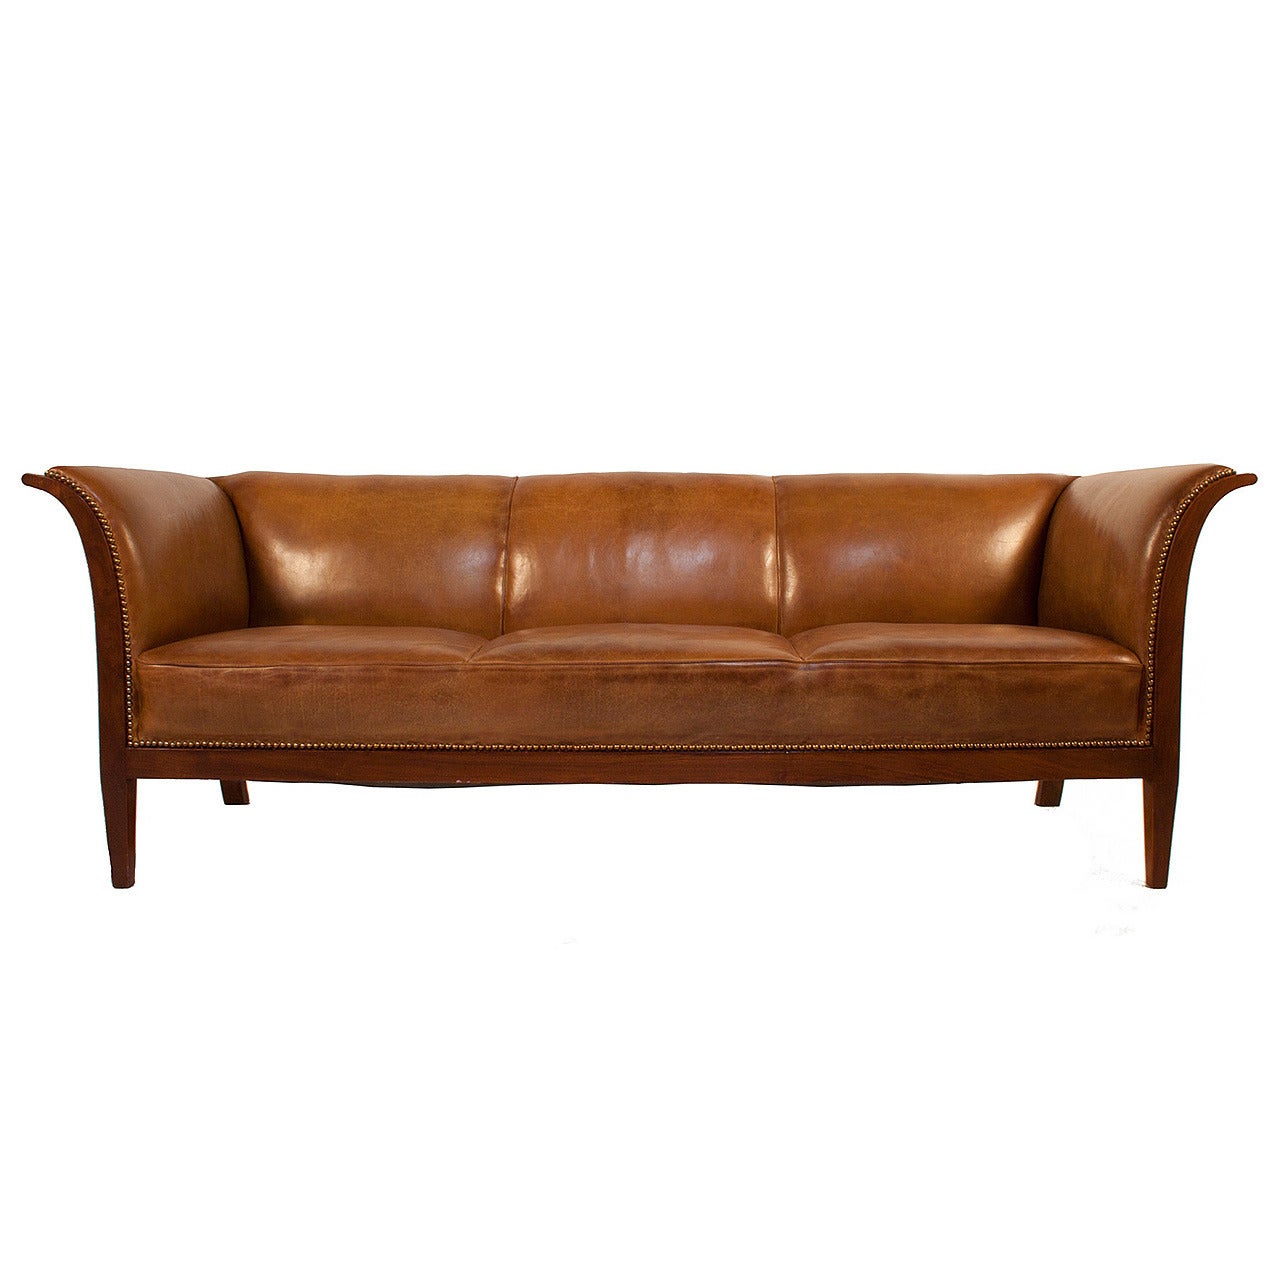 Leather Sofa by Frits Henningsen